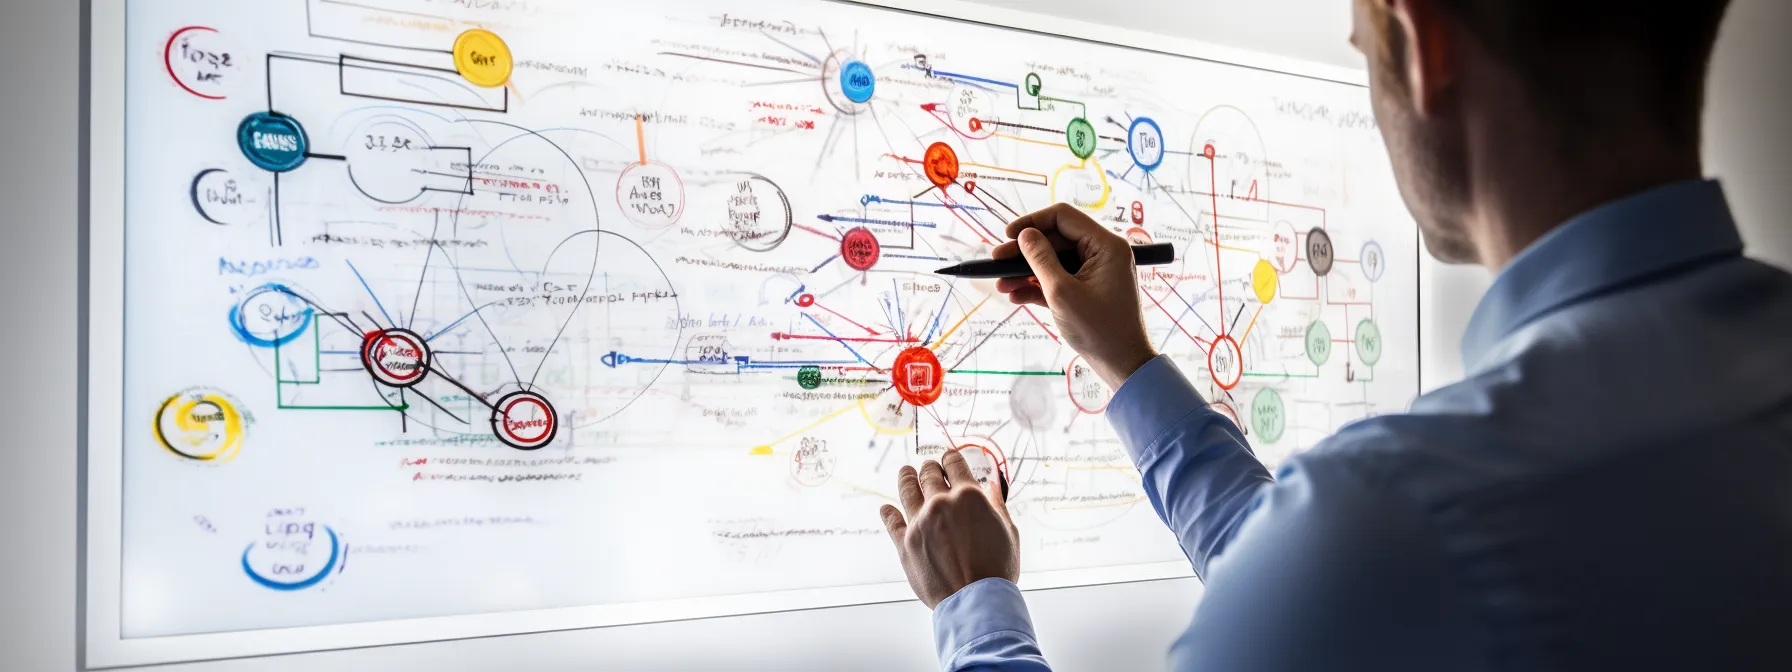 a hand drawing a diagram of interconnected seo tactics and strategies on a whiteboard.